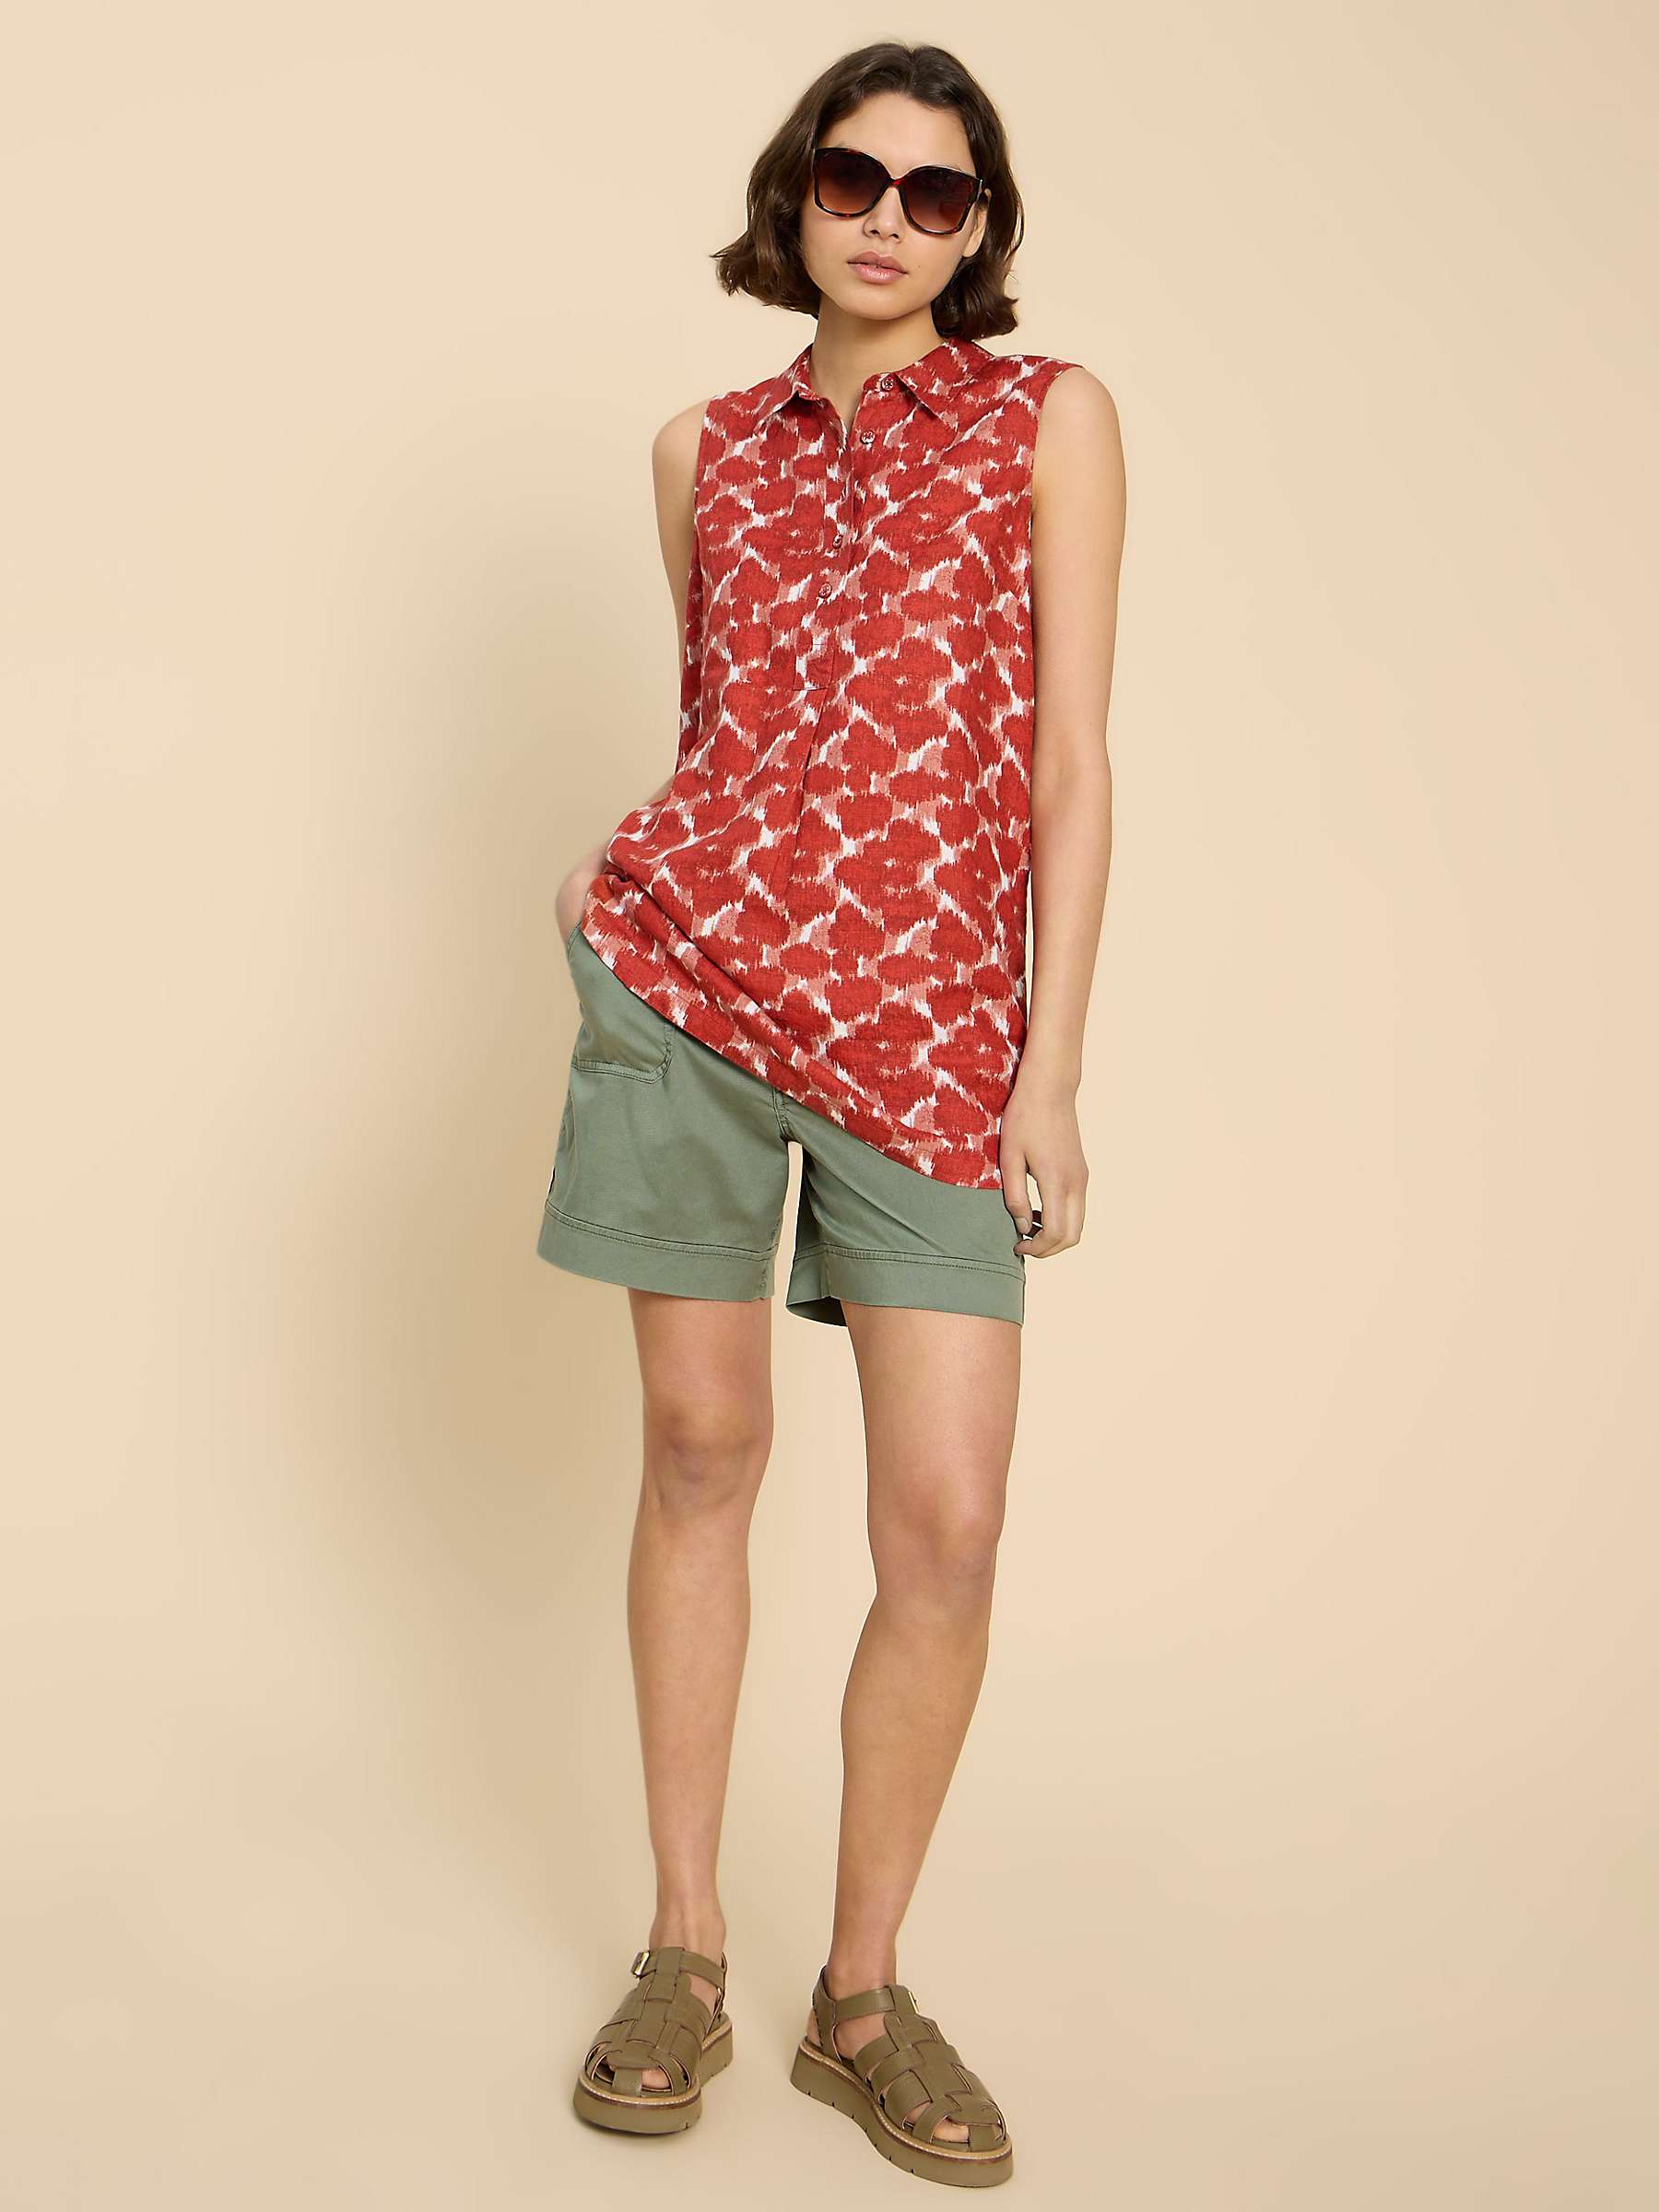 Buy White Stuff Evelyn Linen Tunic, Red Online at johnlewis.com